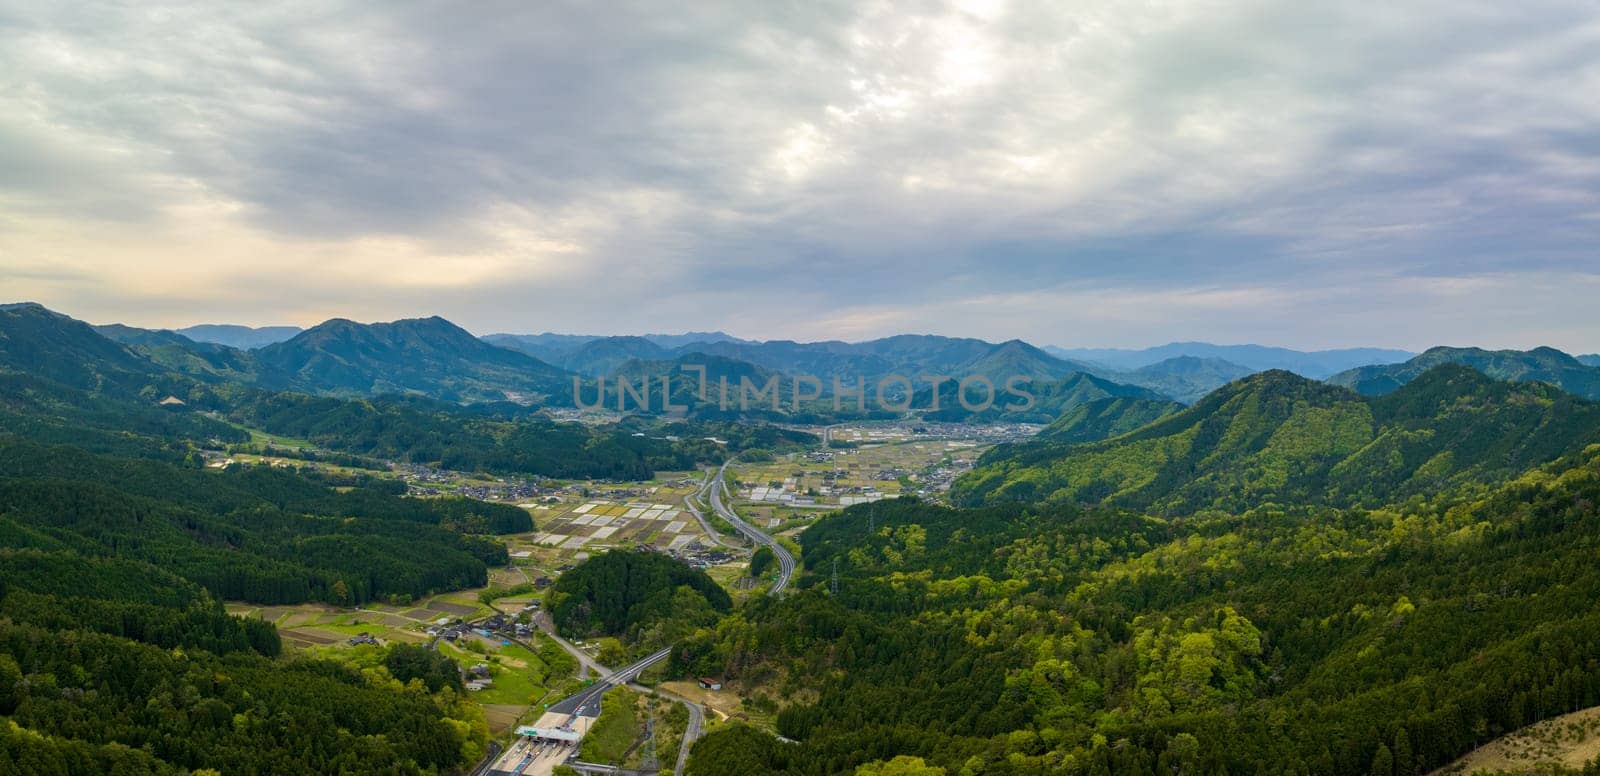 Aerial view of highway by small farming town in Japan mountain landscape by Osaze